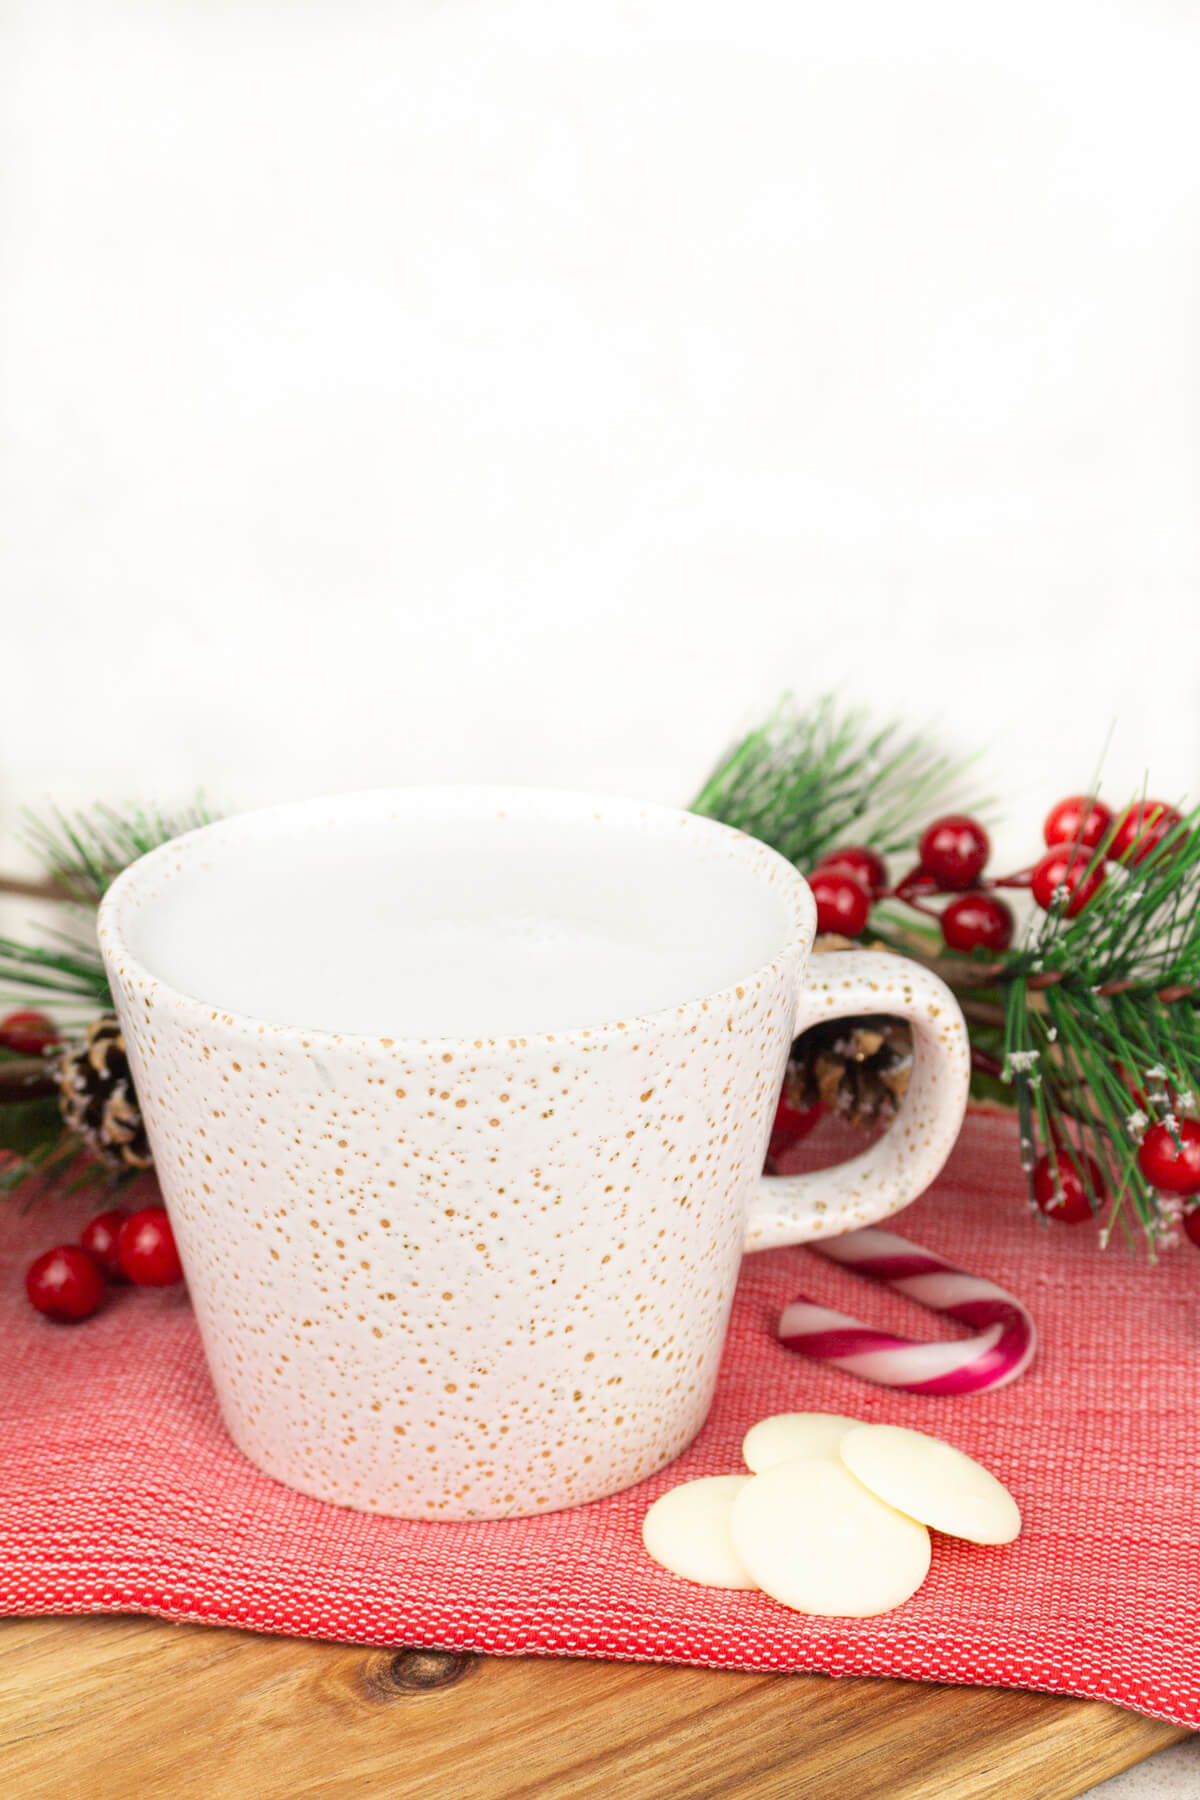 10 Kids' Christmas Mugs That Make The Holidays Cozier - Motherly